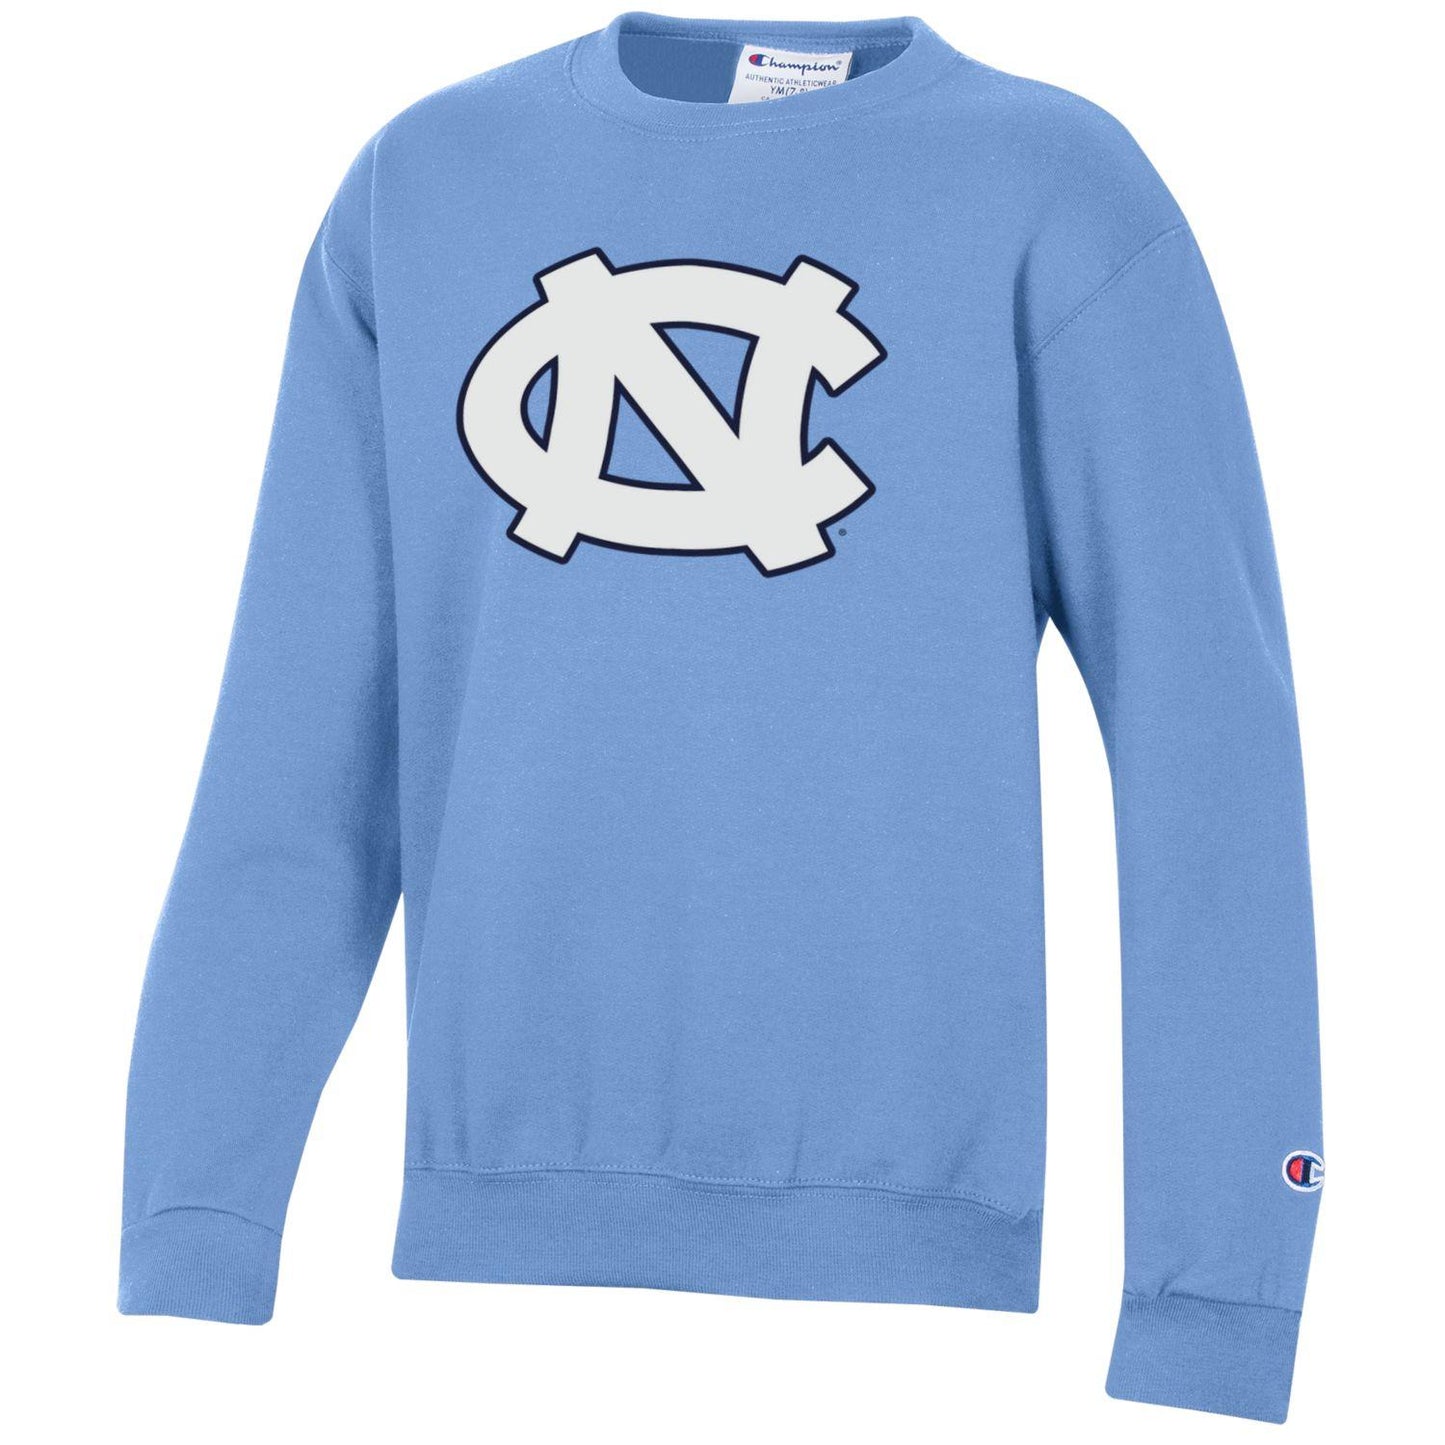 Kid's UNC Game Day Crew by Champion